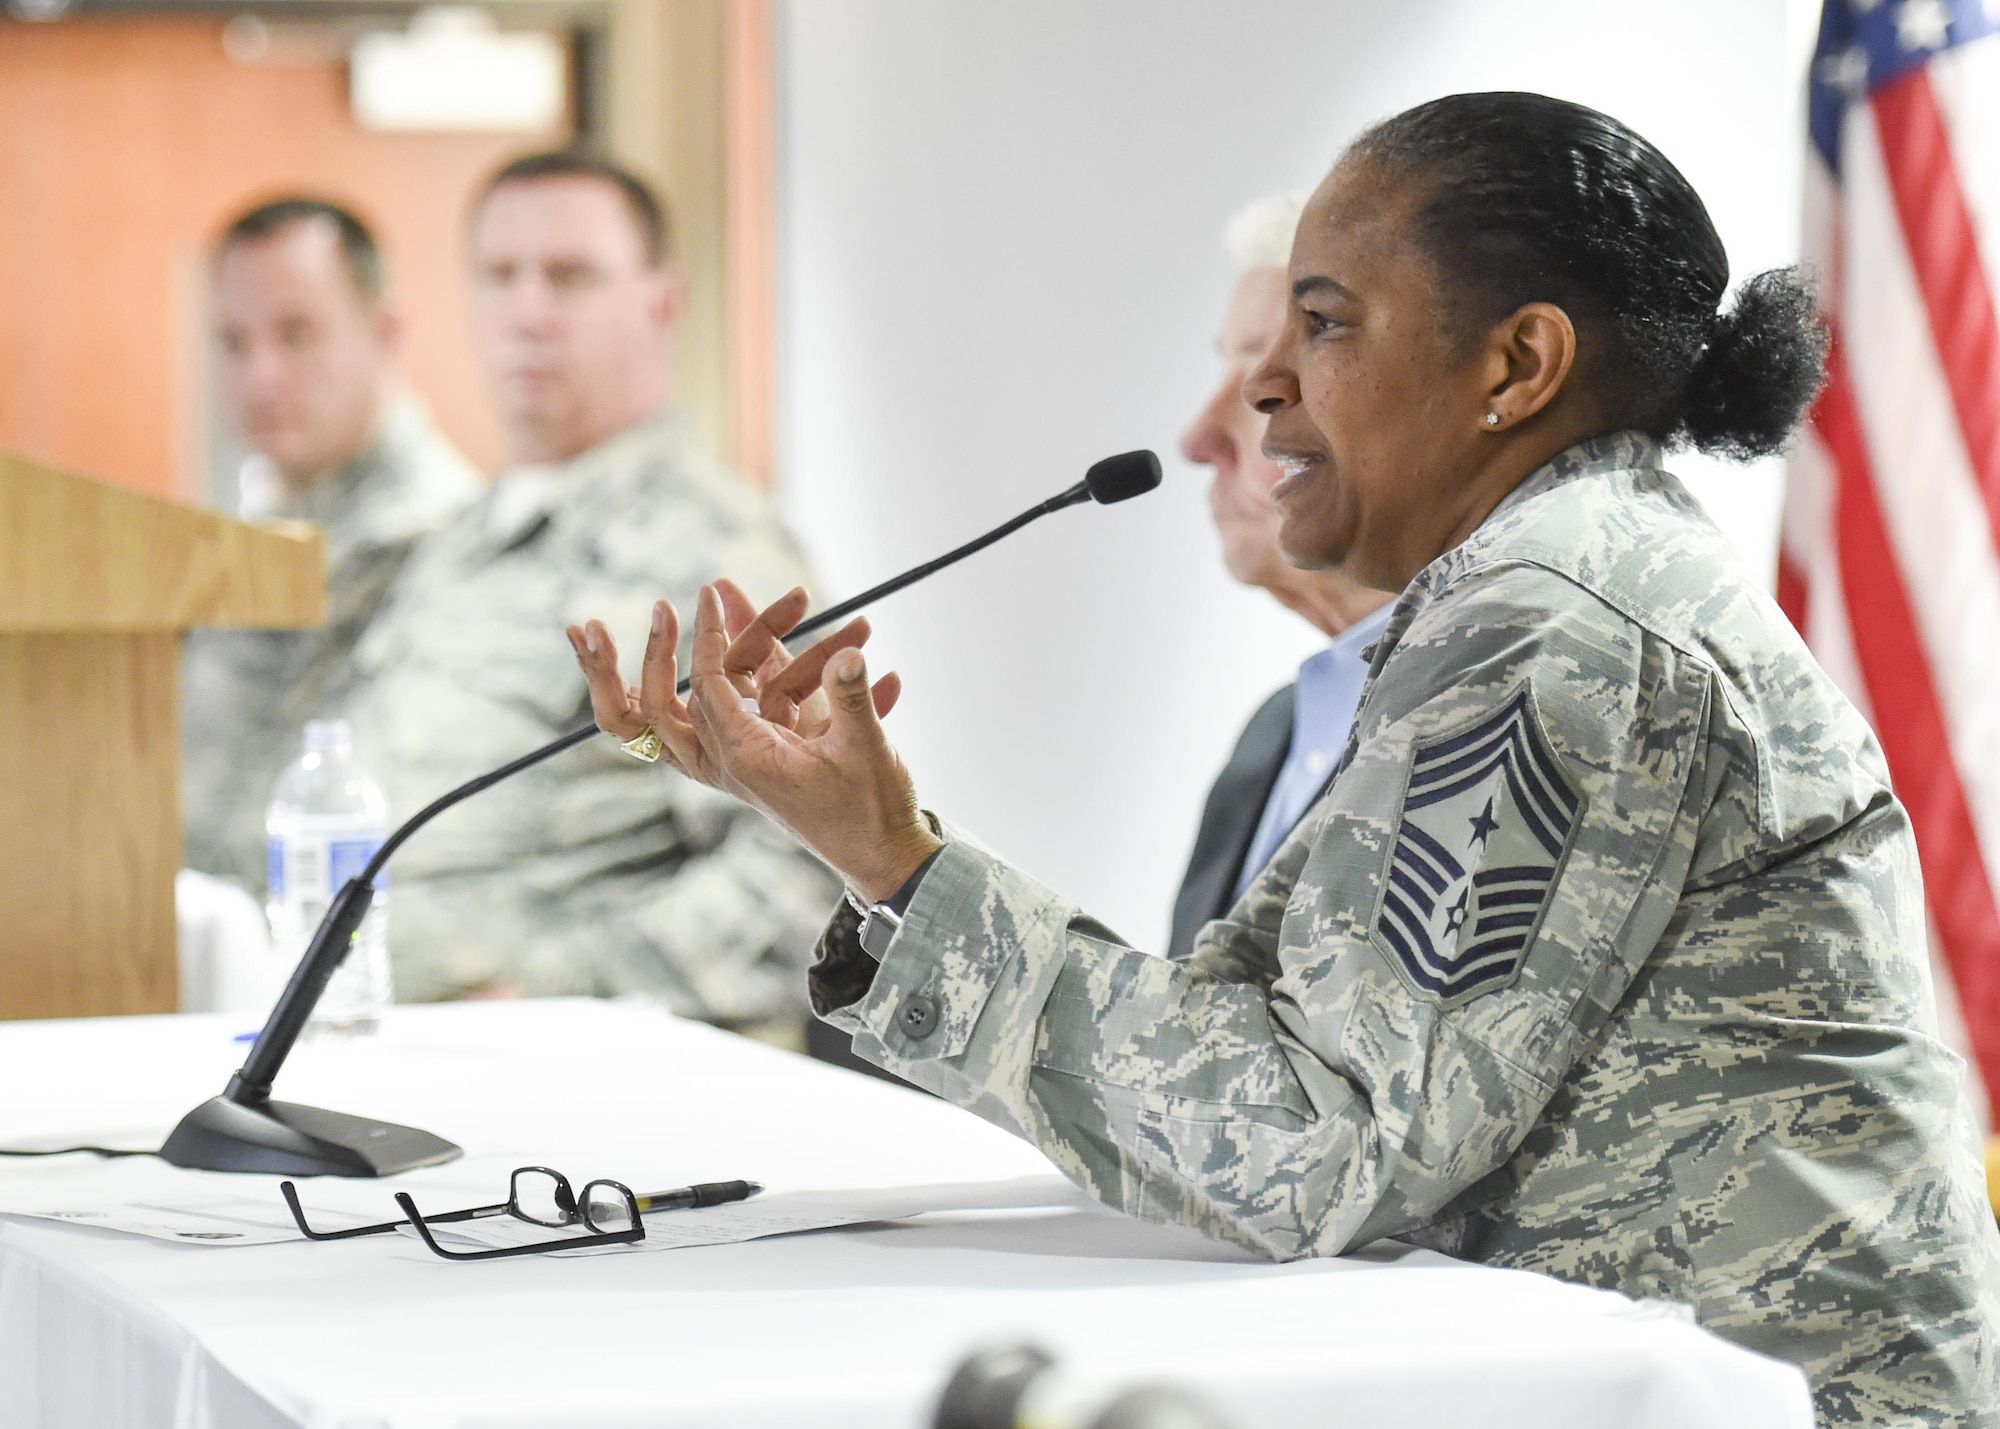 Chief Master Sgt. Shelina Frey, Command Chief Master Sgt. for Air Mobility Command, Scott Air Force Base, Illinois, addresses the audience at an enlisted leadership workshop here March 3, 2017. YARS welcomed 82 noncommissioned officers (NCOs) and senior NCOs to a three-day Enlisted Leadership Workshop March 1-3, 2017. The goal of the workshop was to present the Airmen information on things they may not have heard about before like the new blended retirement system and to give them new information about other topics like enlisted performance reports, fitness and special duty assignments. (U.S. Air Force photo/Eric White)